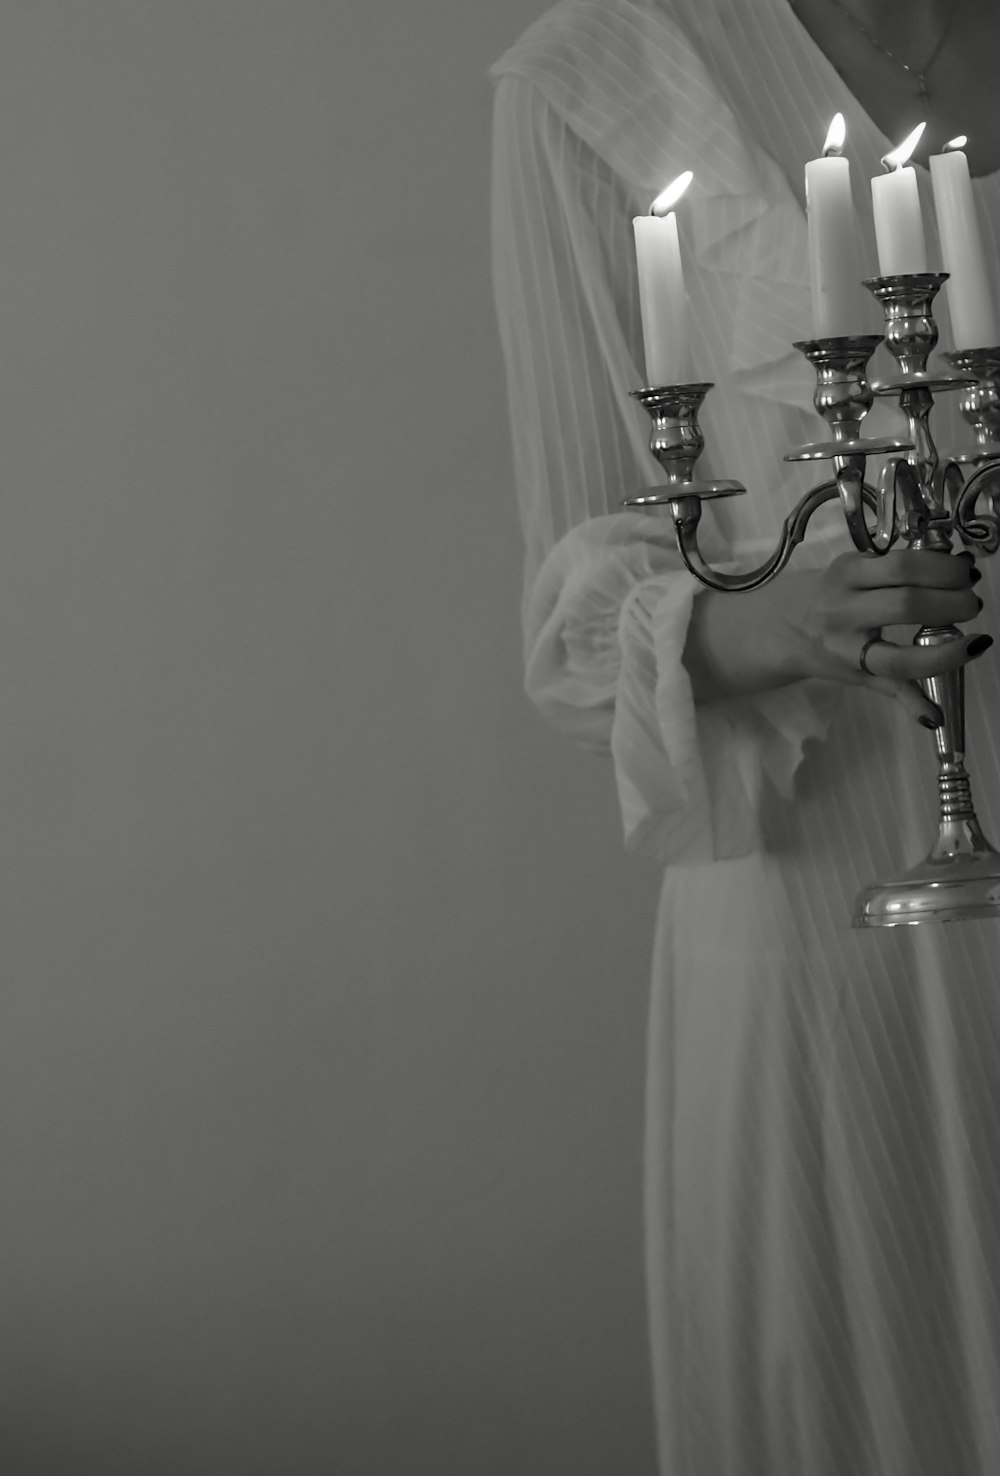 a person in a white dress holding a light fixture